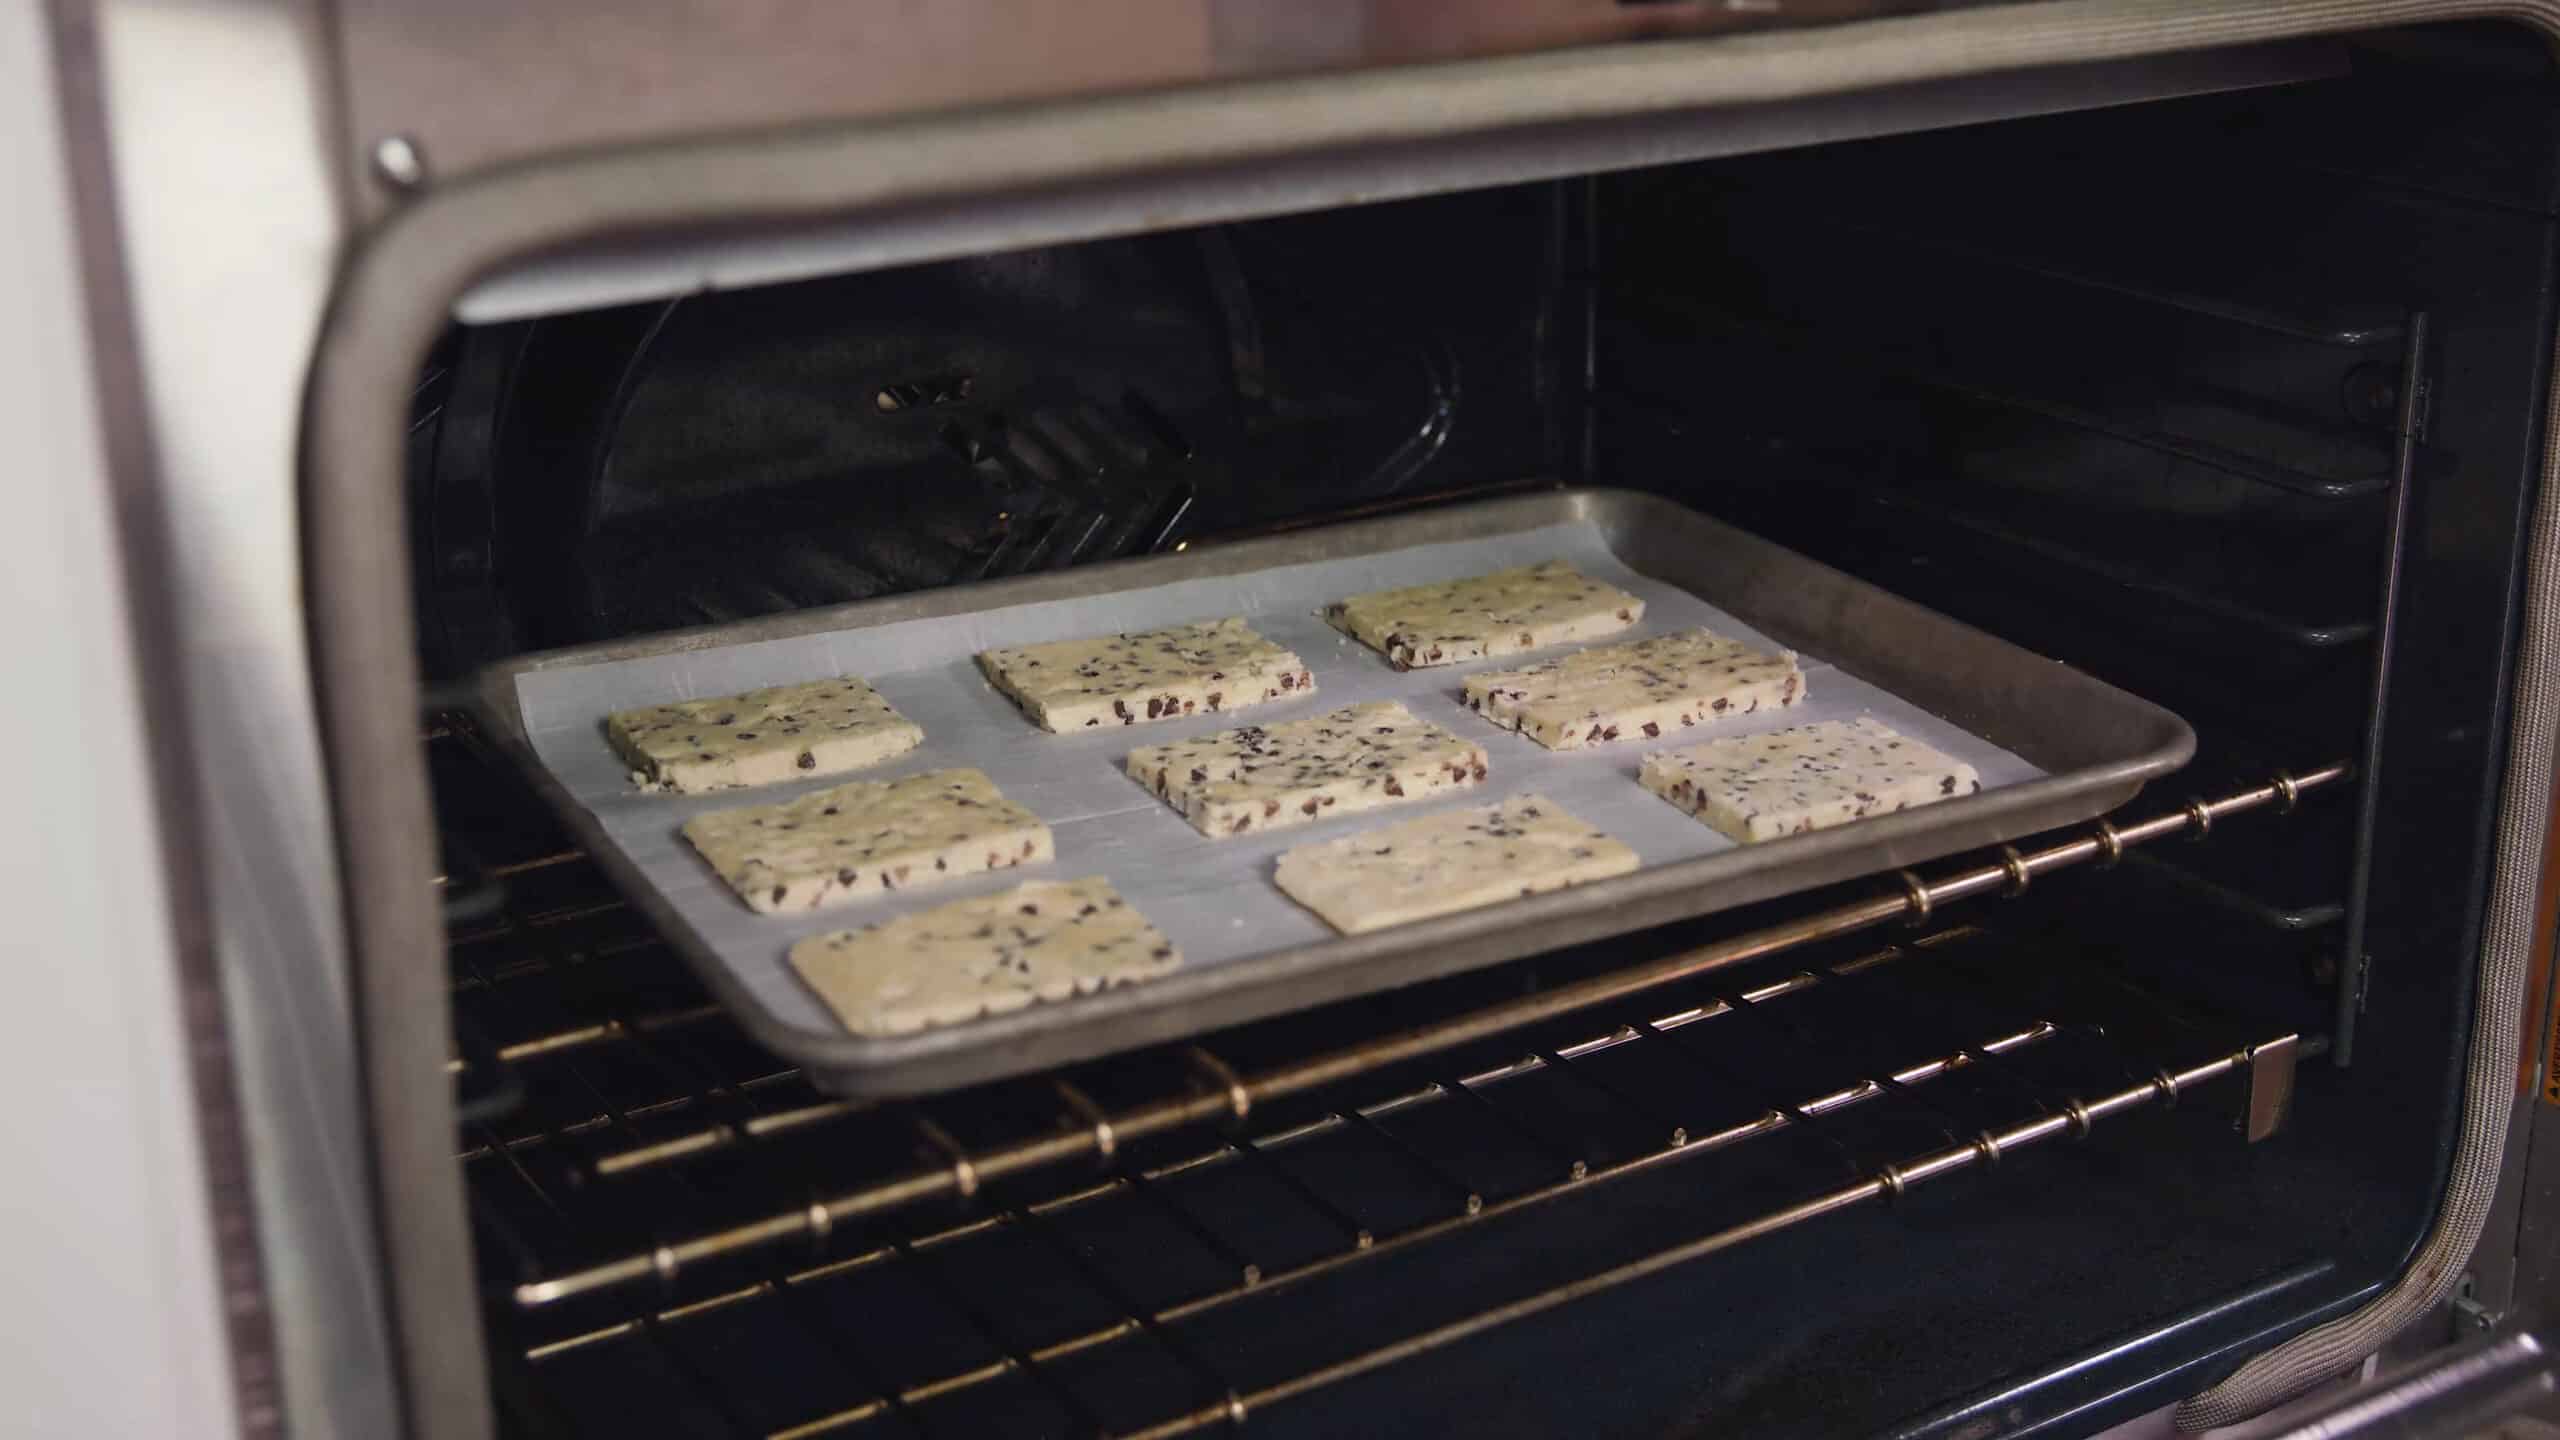 Angled view of an open oven with a metal baking sheet lined with parchment paper topped with nine chocolate chip shortbread cookies all on a metal rack in the middle of the oven.